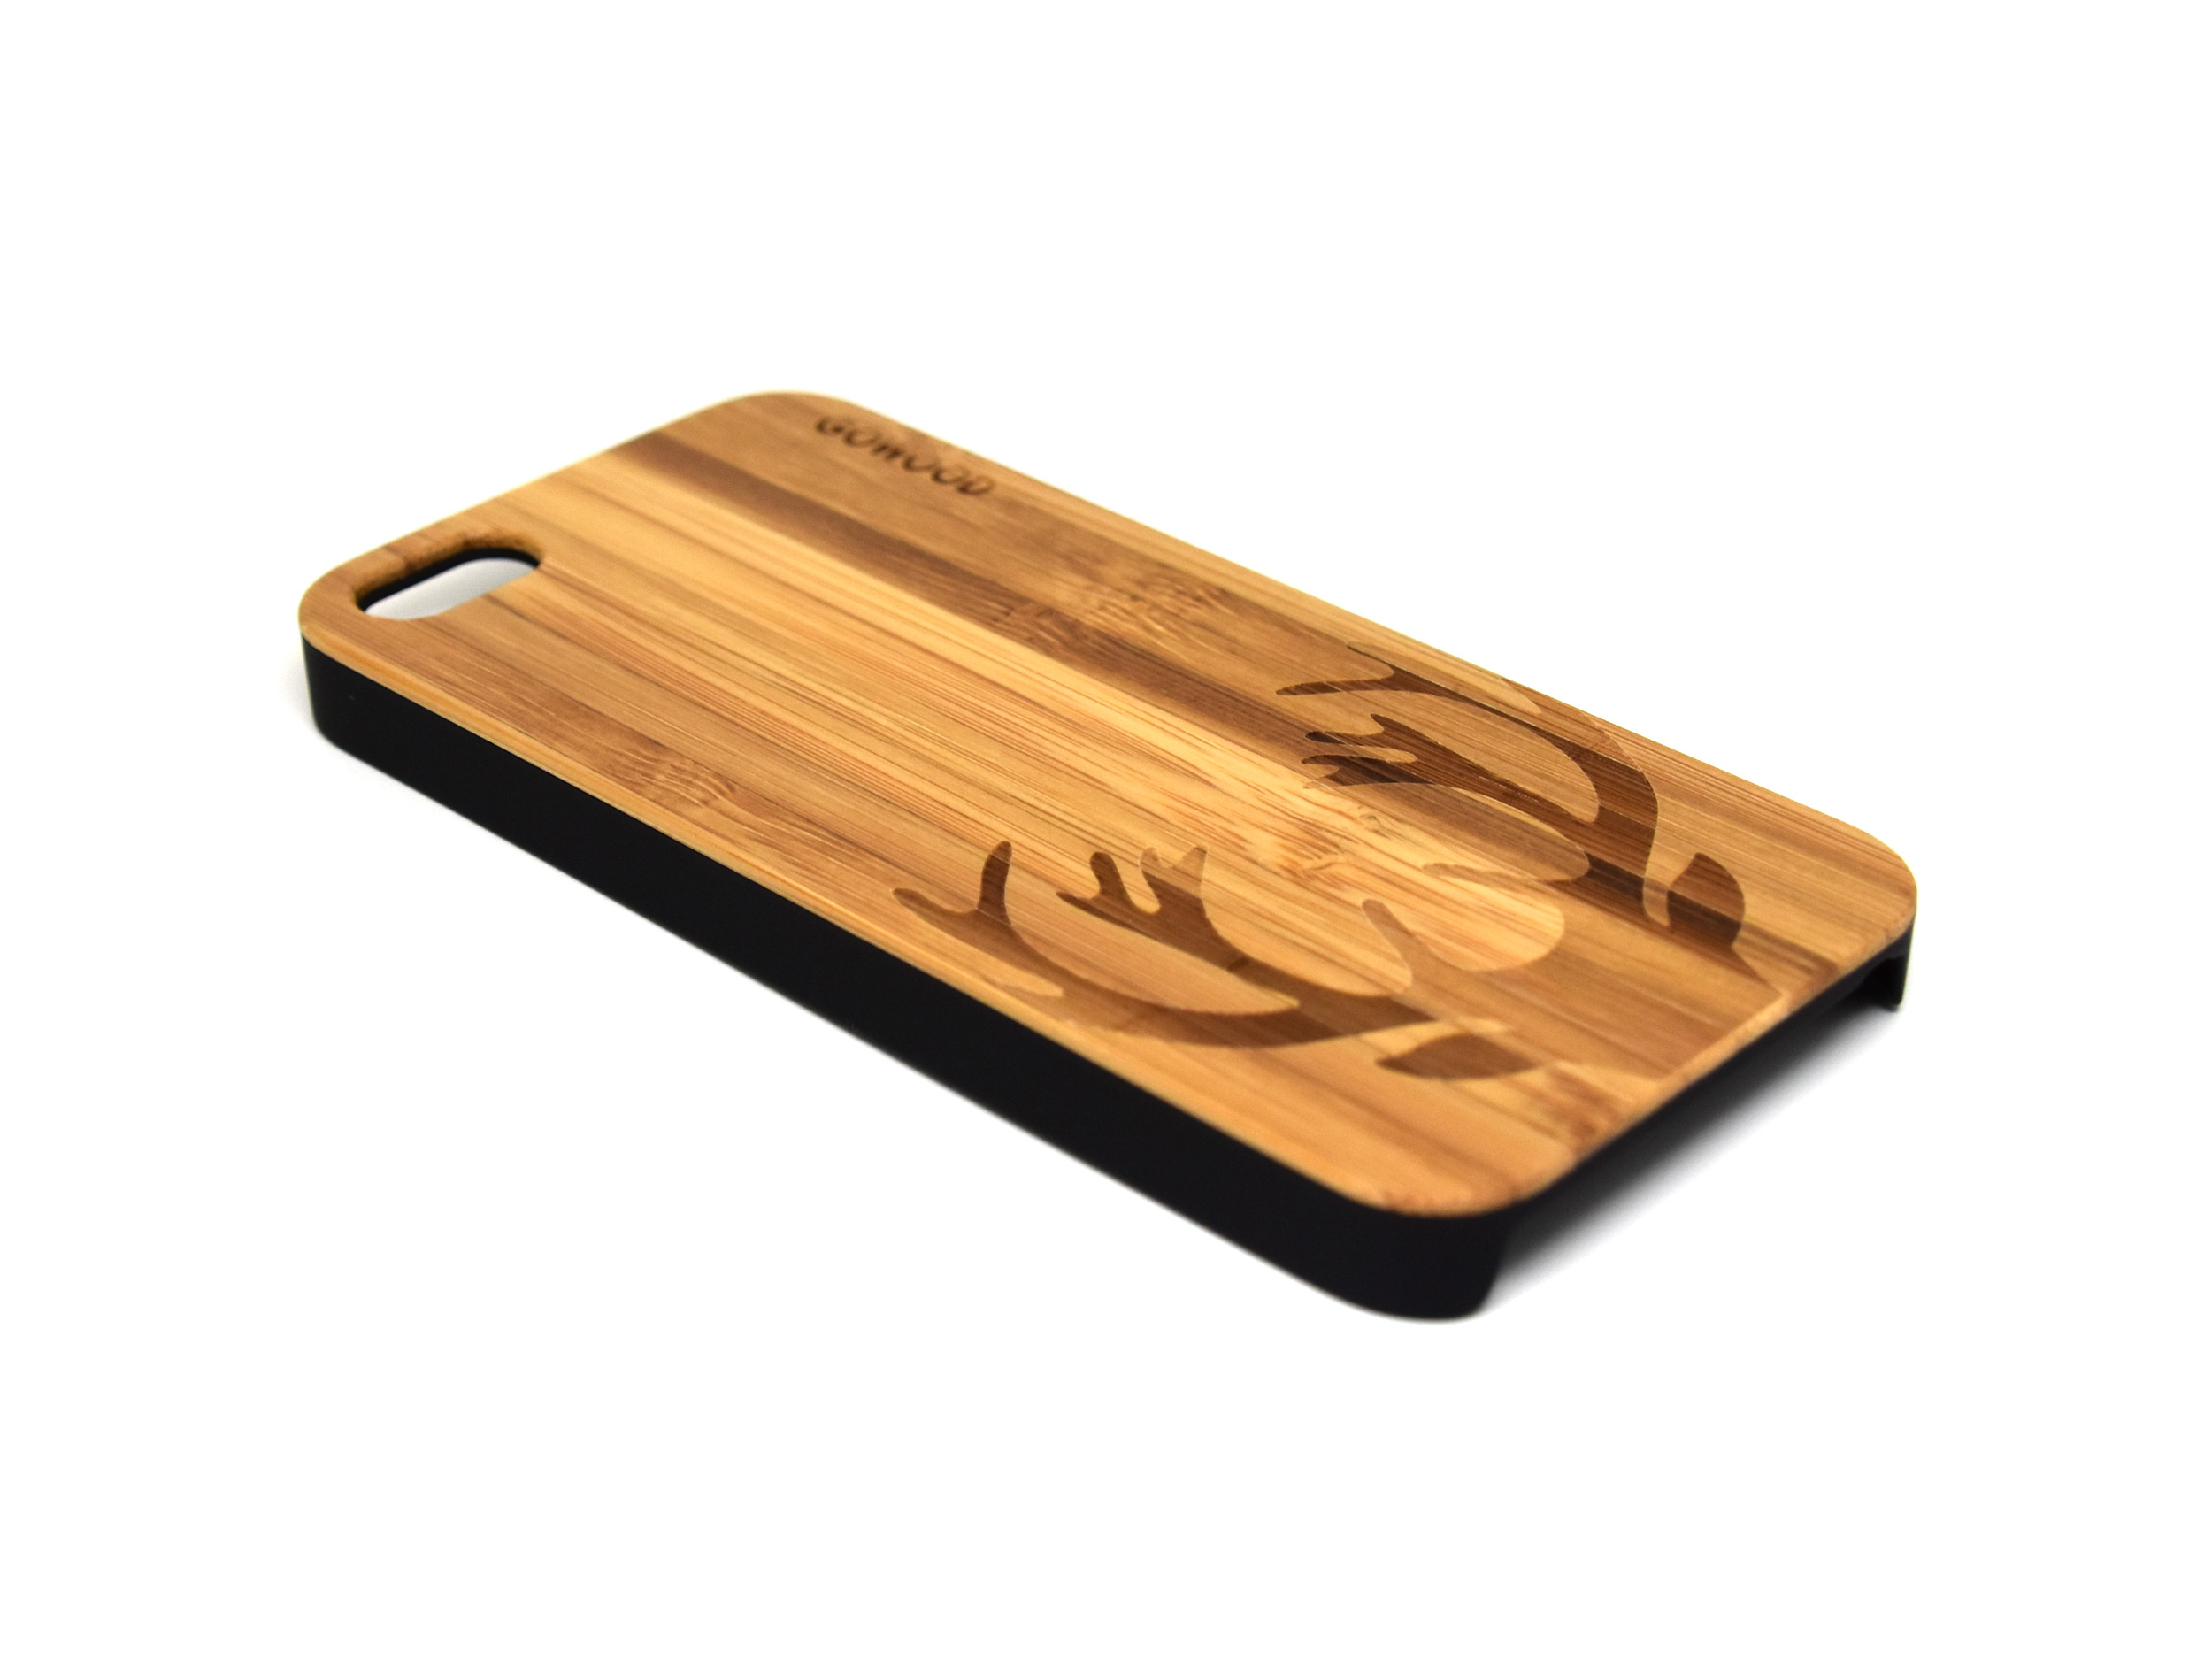 iphone 5 case bamboo wood with deer